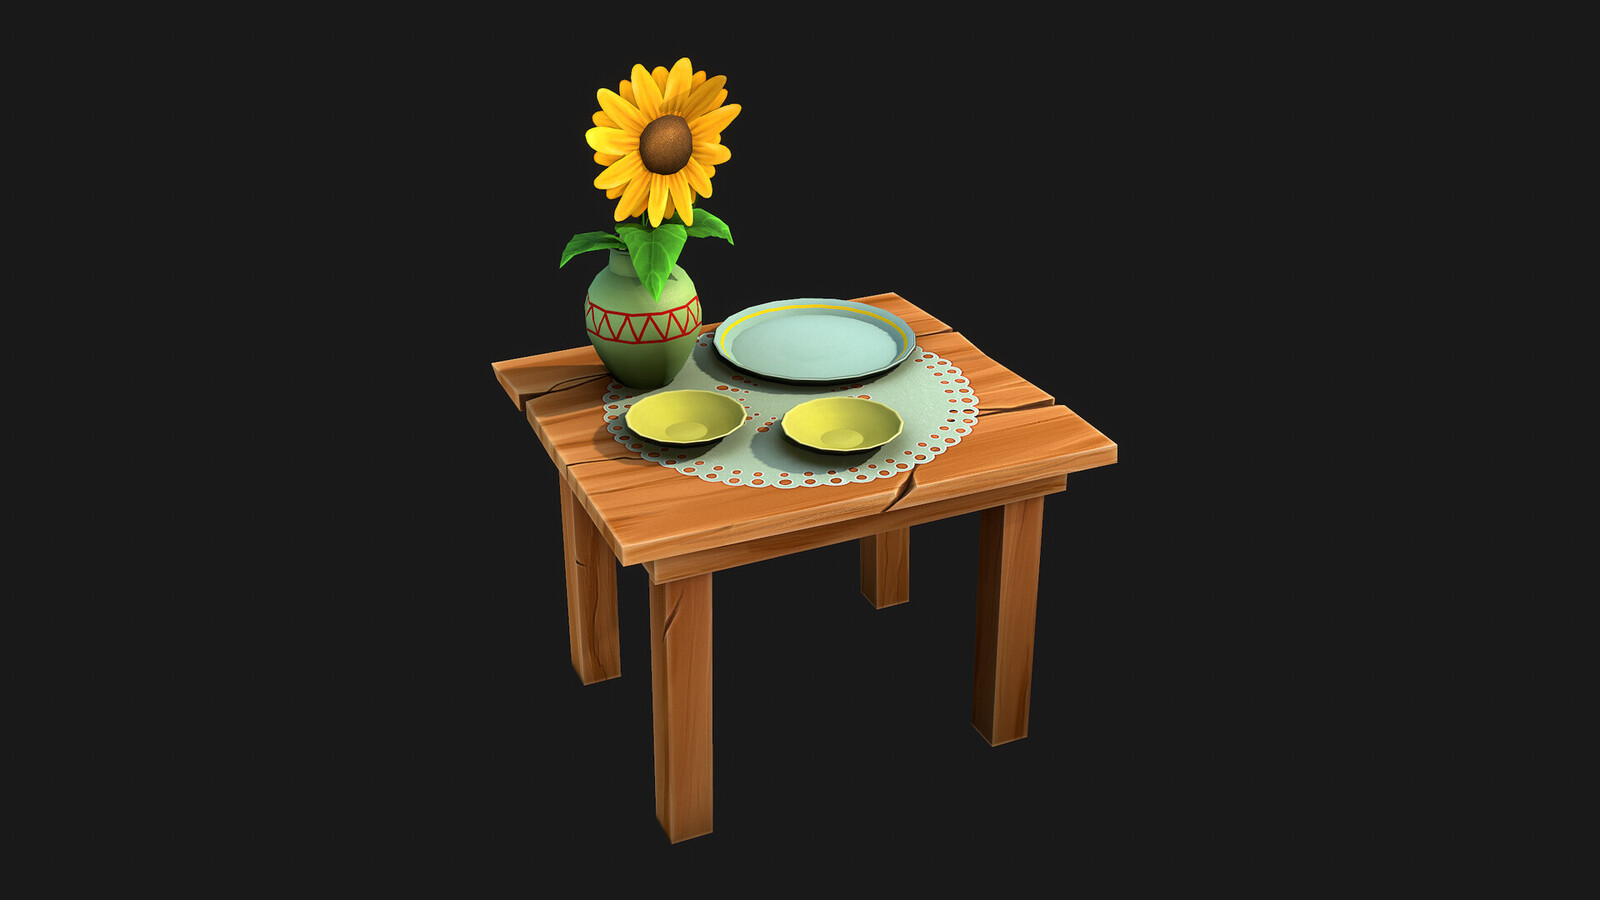 Textures for the table and plates so far